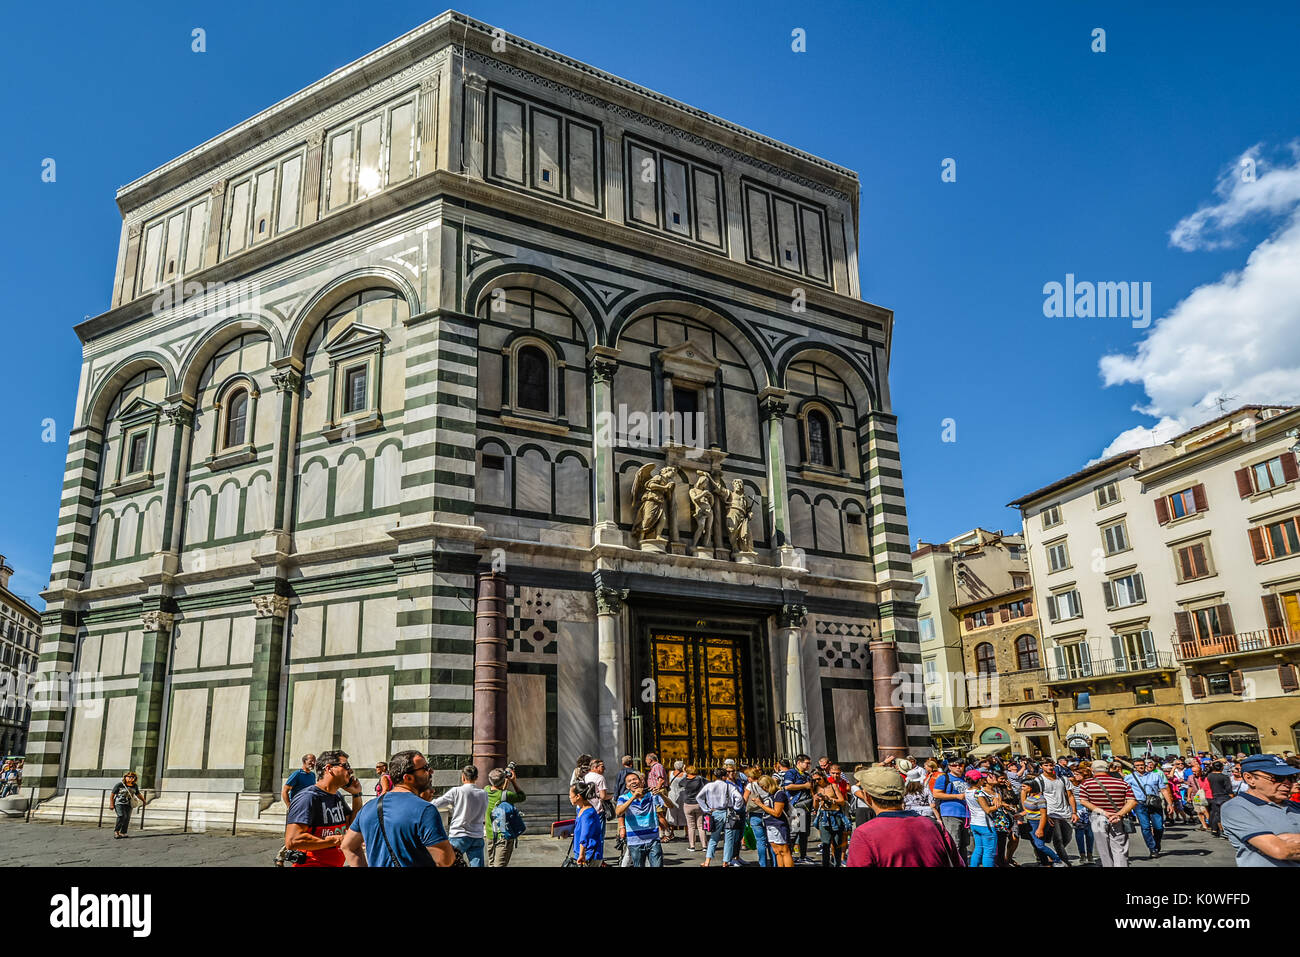 The Florence Baptistery across from the Duomo in Florence Italy showing the bronze doors by Ghiberti as tourists enjoy a sunny day in Tuscany Stock Photo